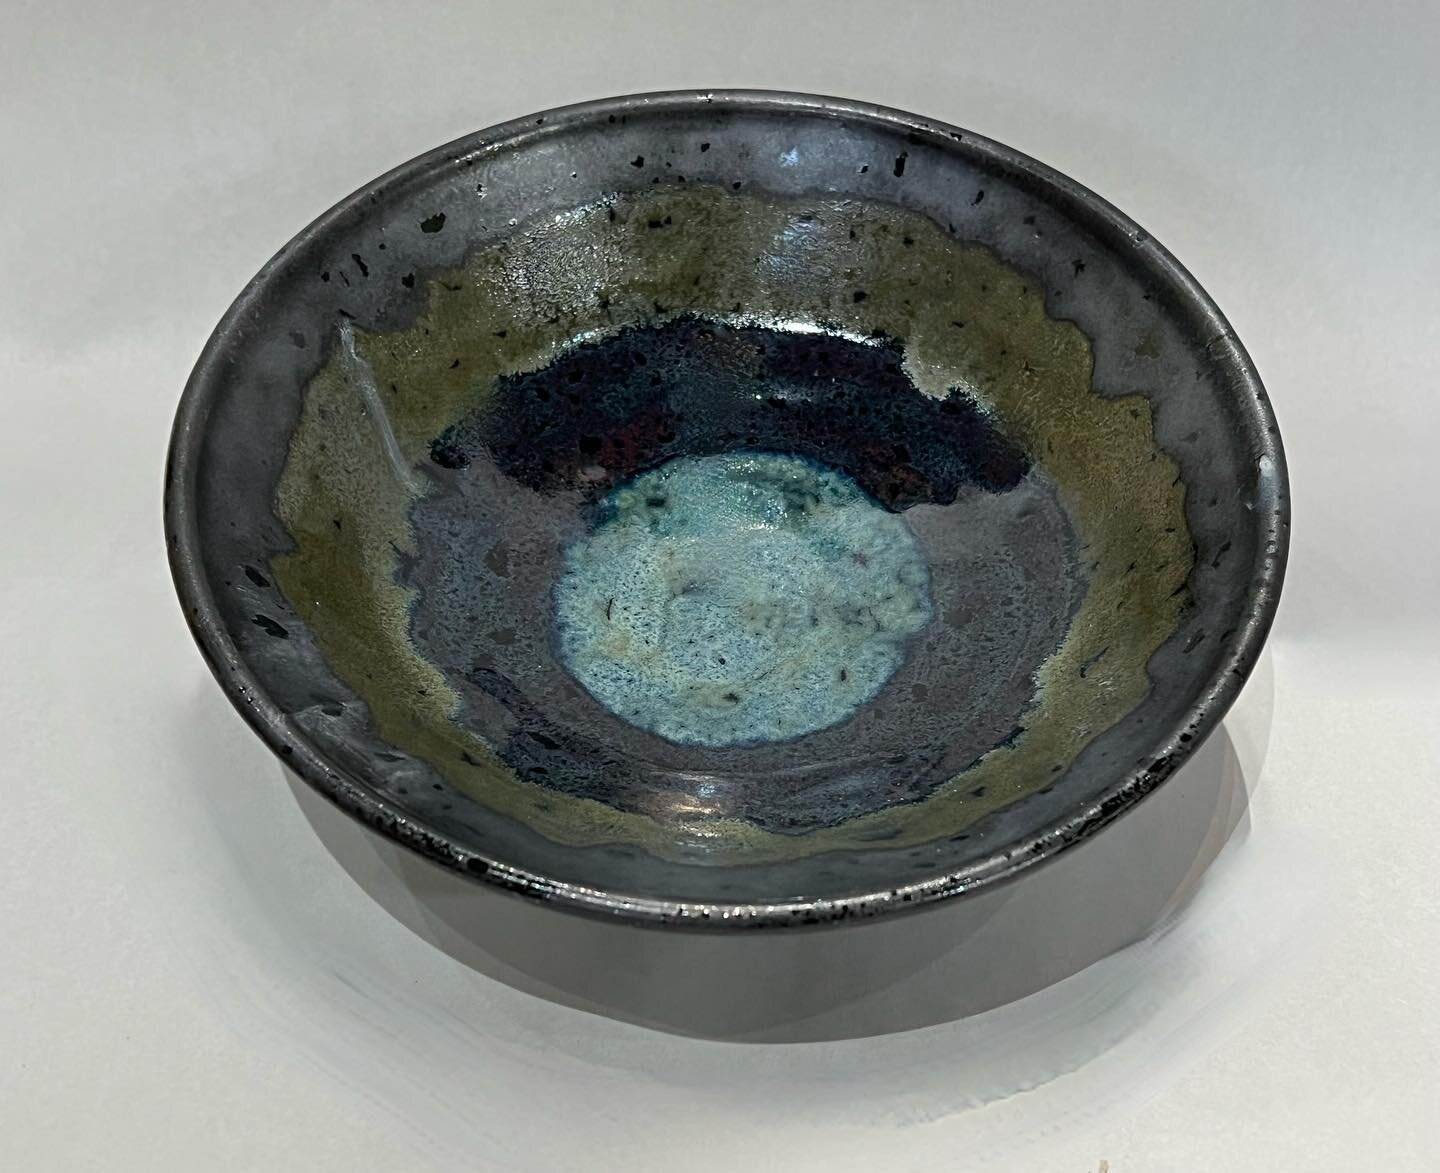 ATTENTION HENRY! Please share your glaze combos&hellip;.we are all swooning over this bowl!